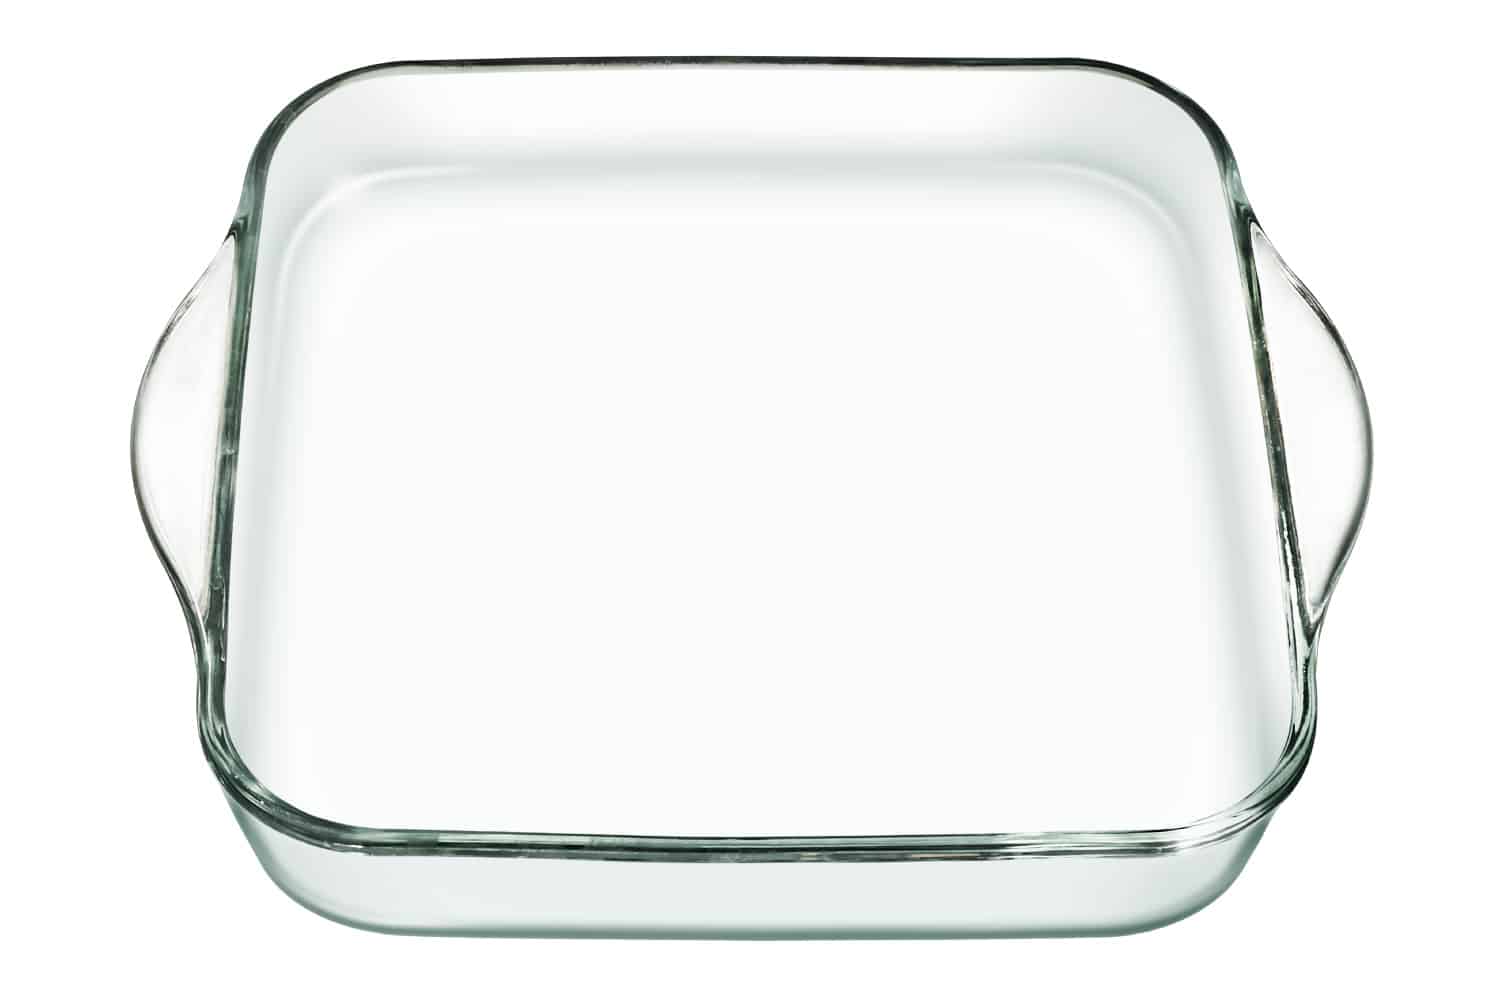 Heath resistant glass casserole baking dish with two side handles isolated on white background